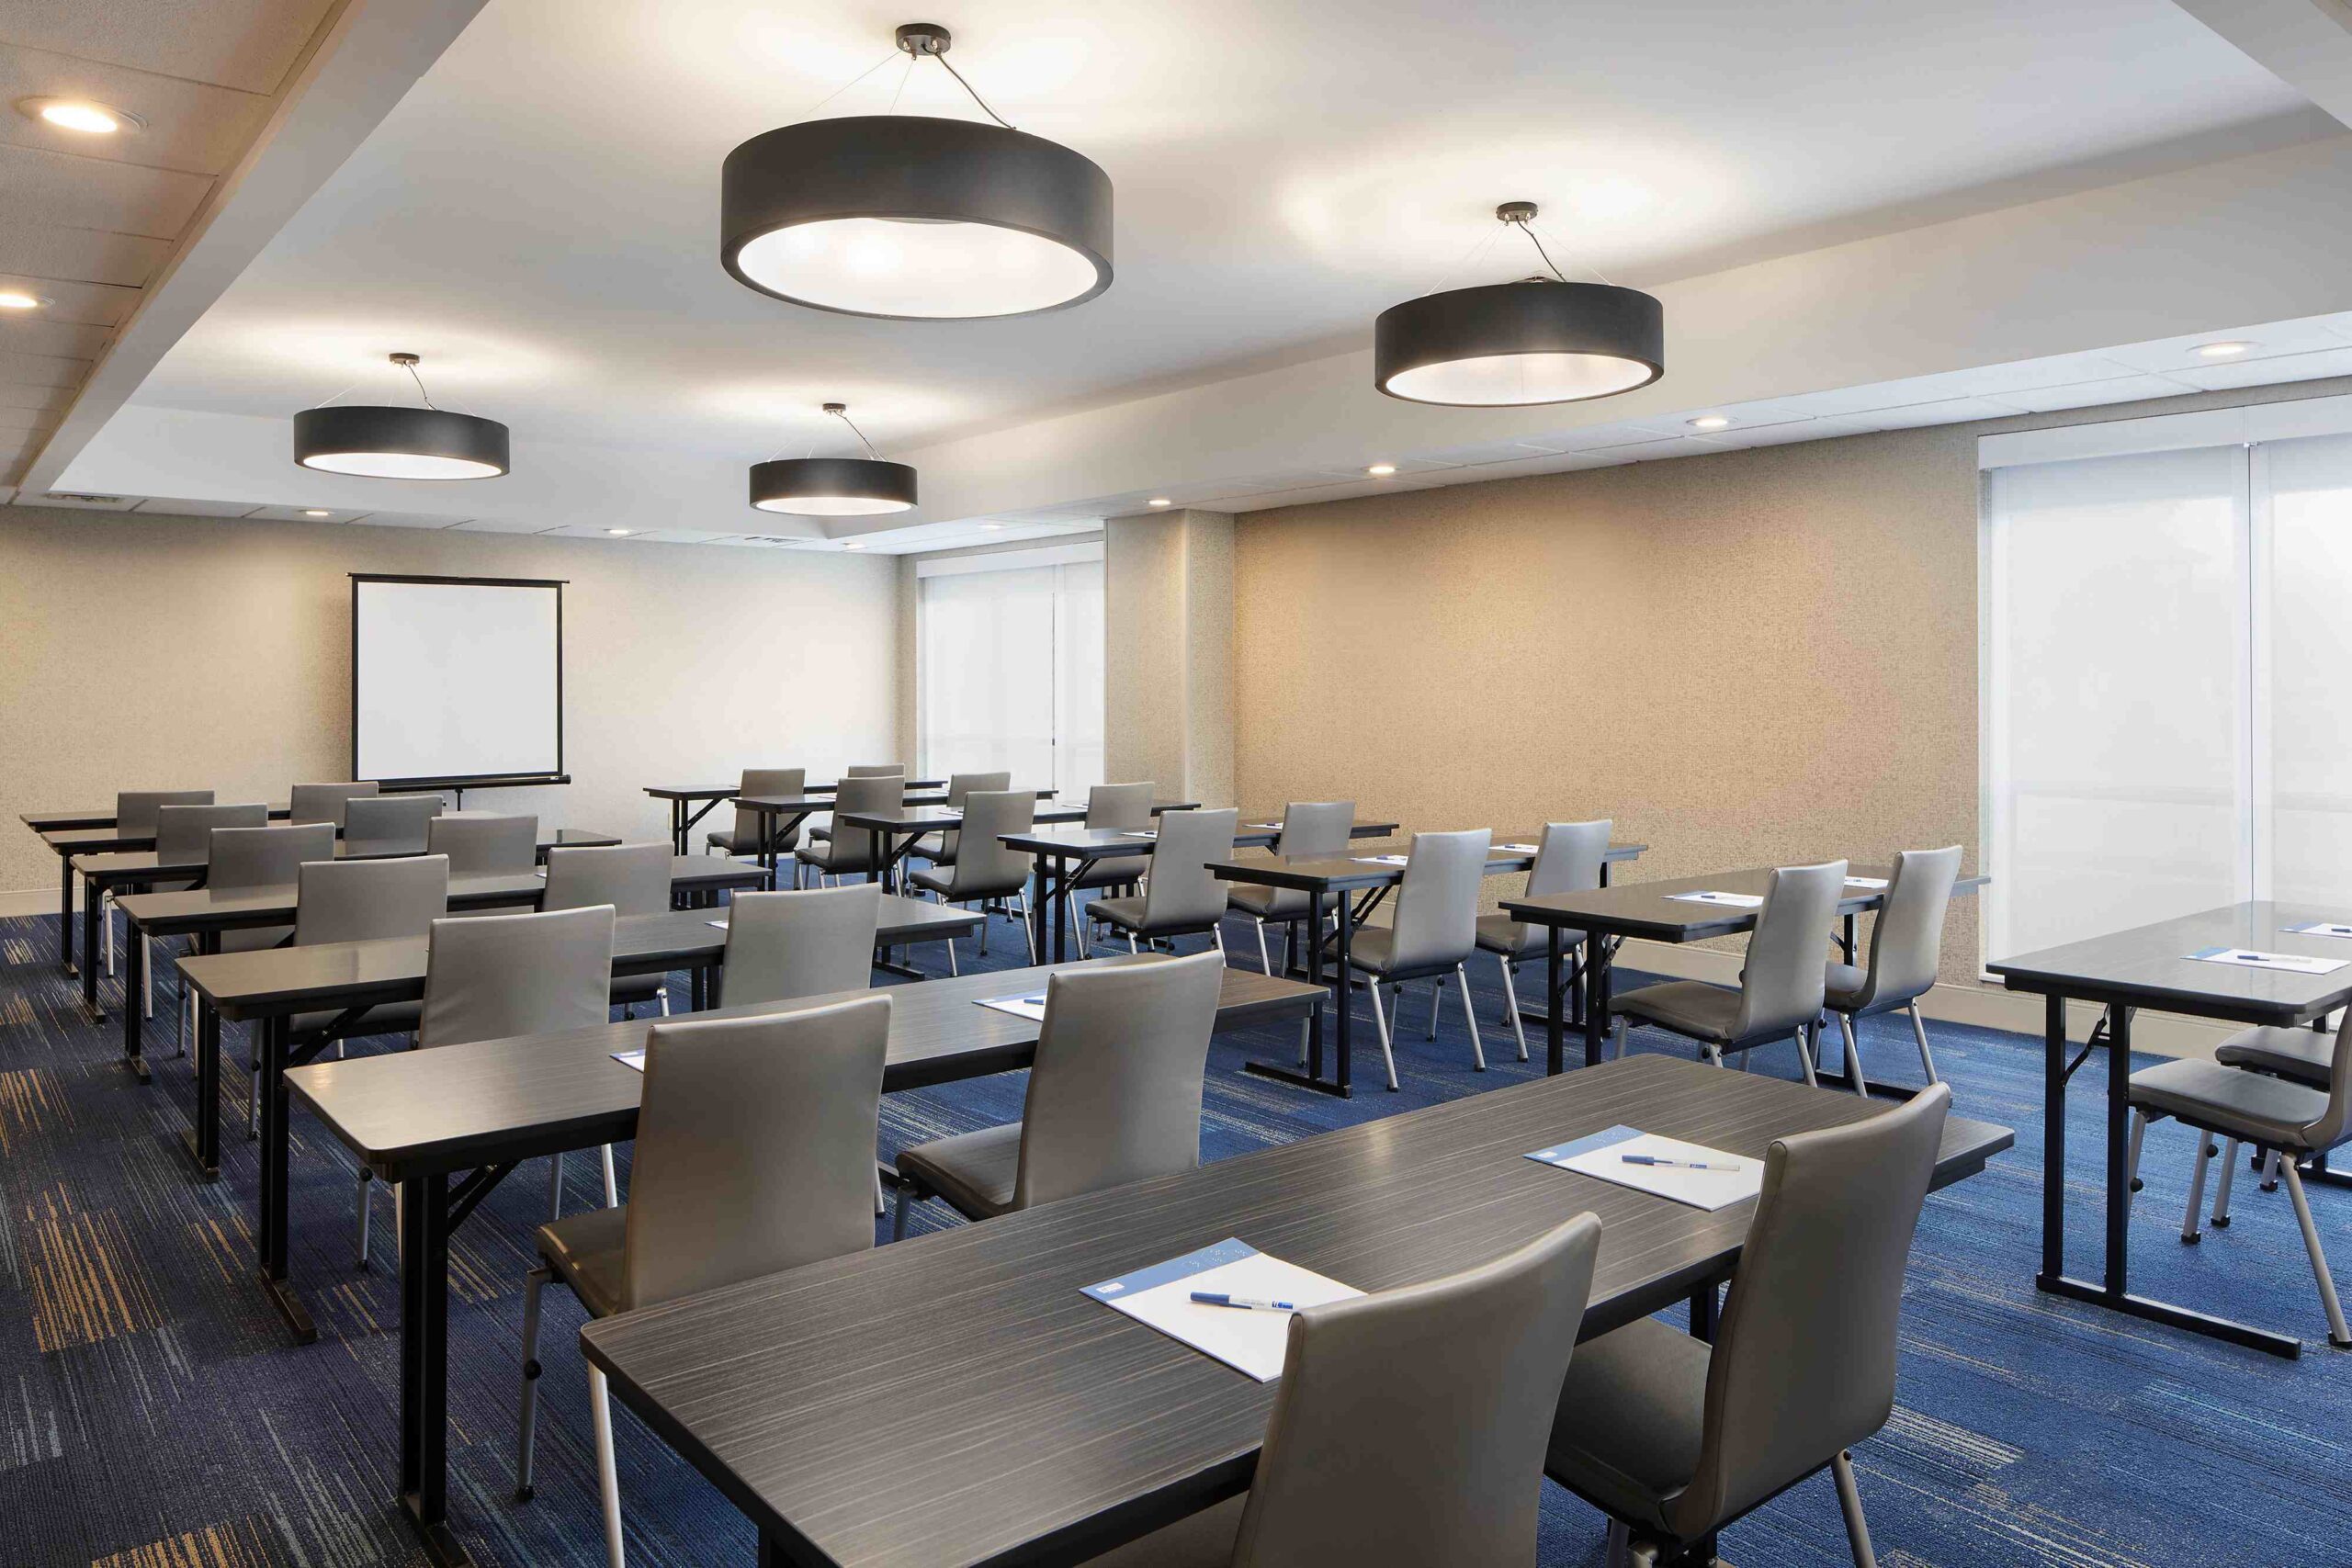 Conference Room with a projector screen, desks, and chairs